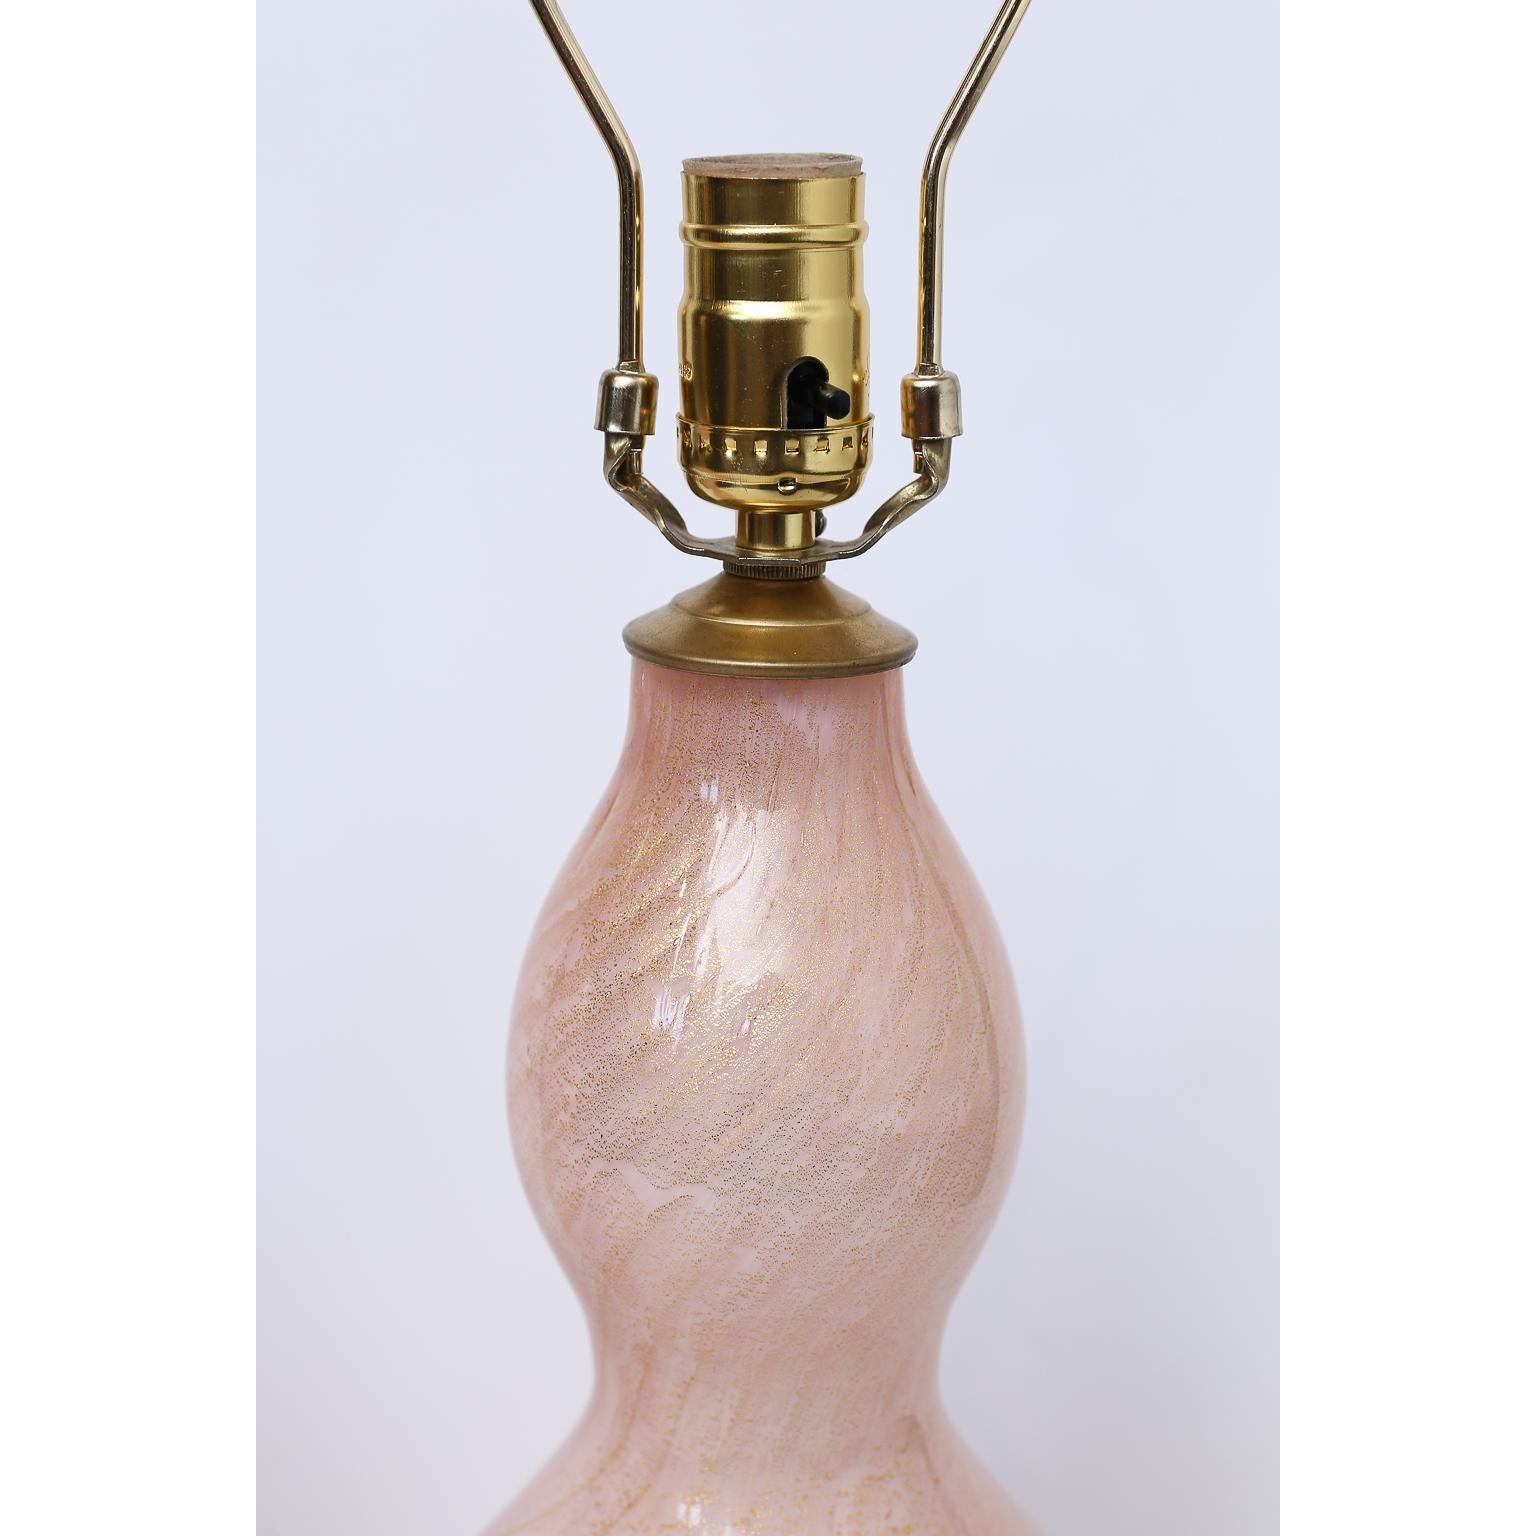 Beautiful pair of Murano glass lamps with Lucite base. Price listed is for the pair.